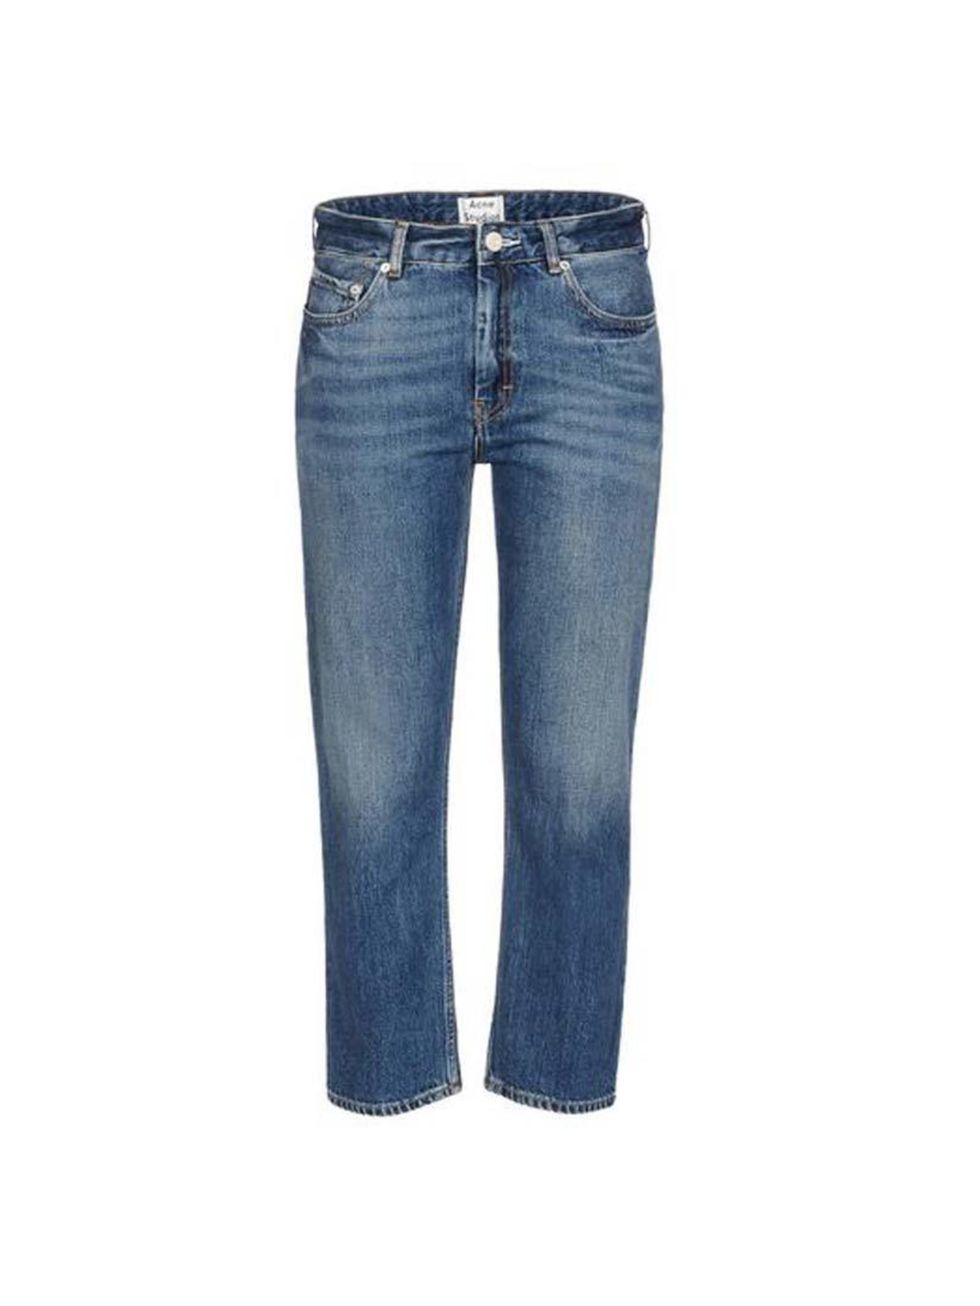 <p>These are slightly cropped - solving the should-I-tuck-my-jeans-in ankle boot dilemma.</p>

<p> </p>

<p>Acne Studios jeans, £180 at <a href="http://www.thecorner.com/gb/women/denim-trousers_cod42377870pj.html" target="_blank">TheCorner.com</a></p>